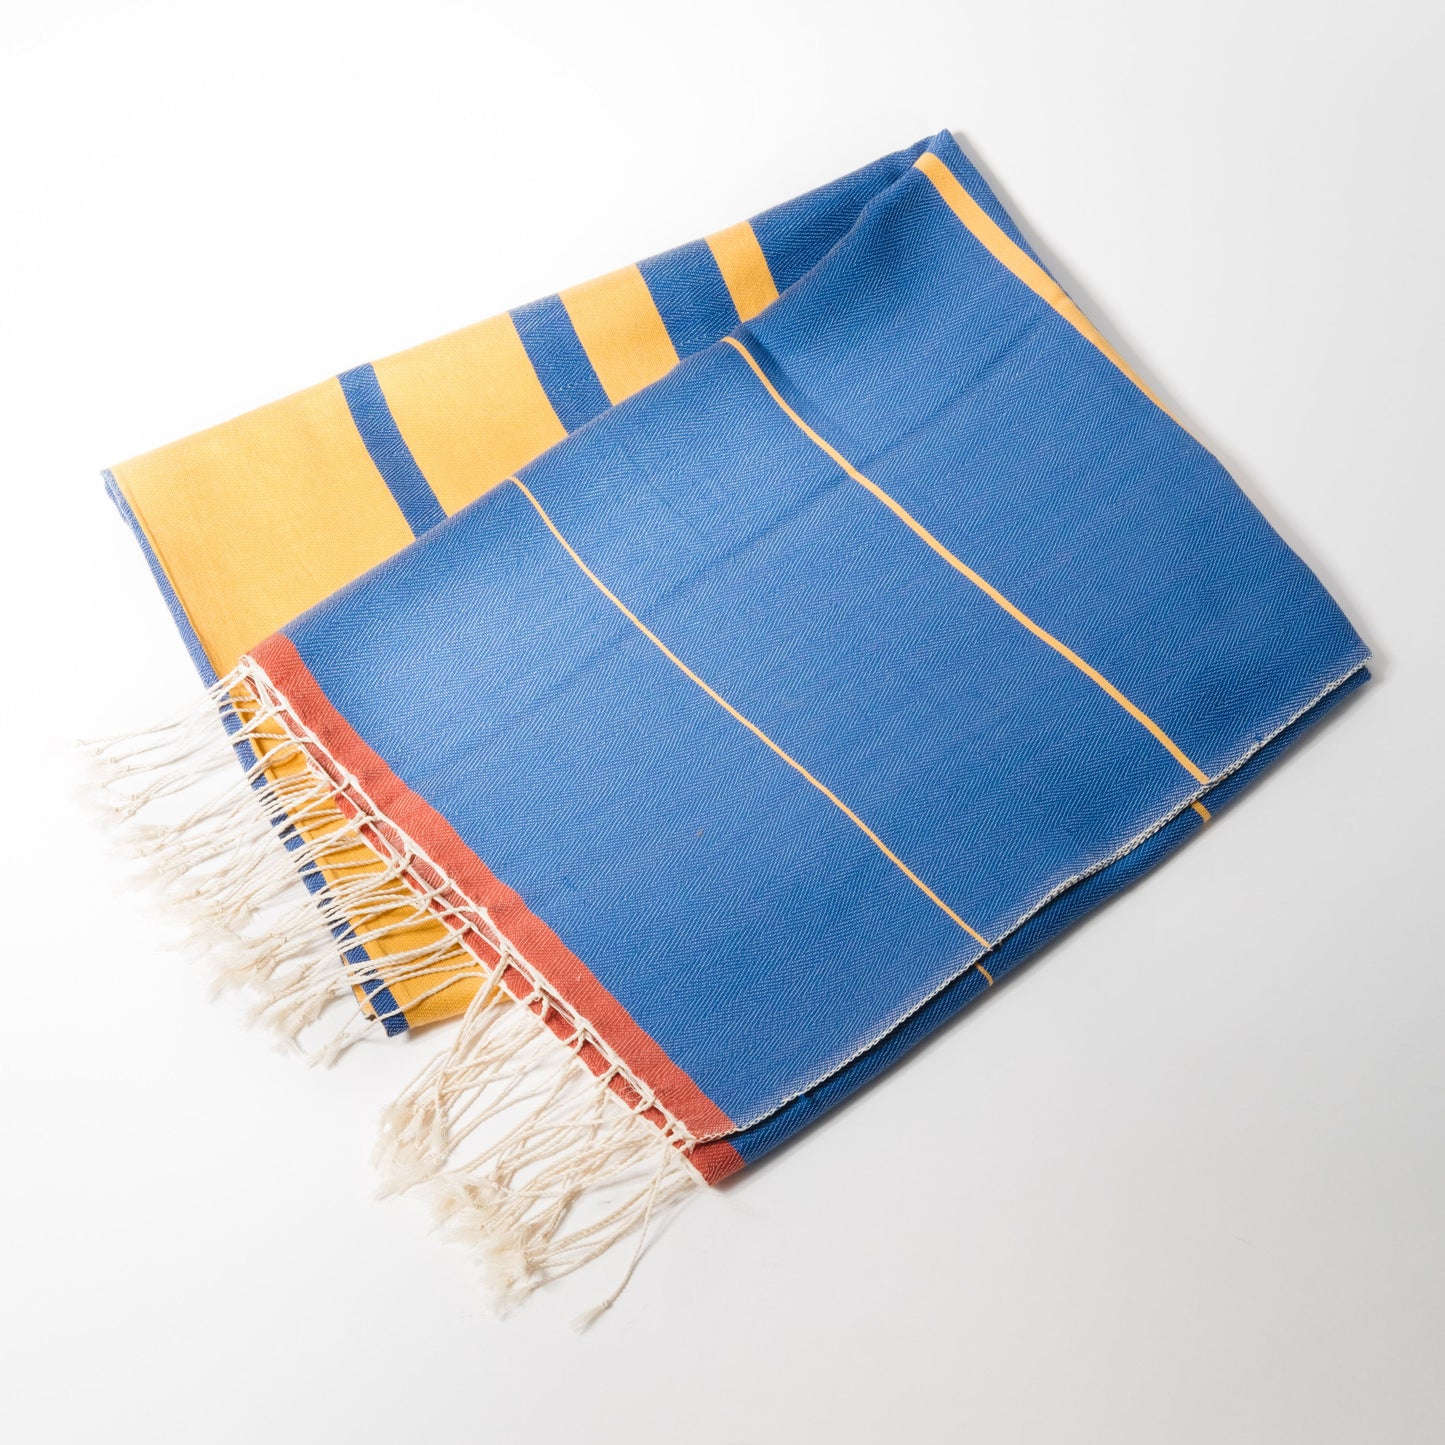 Former Flame Fouta Common Things